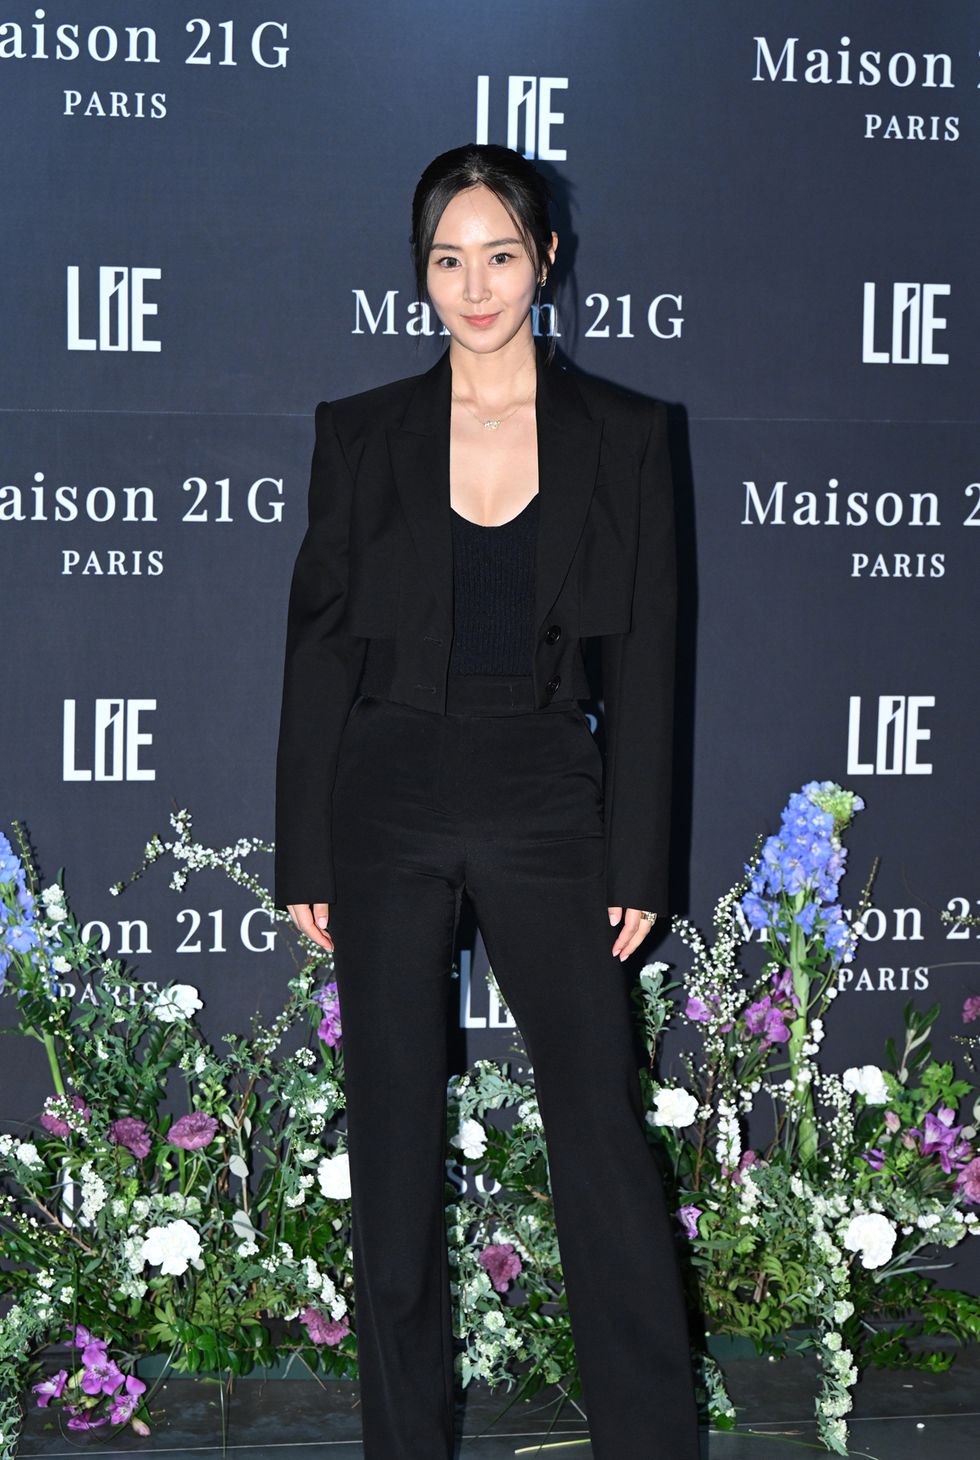 yuri of snsd attends the maison 21g photocall event at chungdam square on march 24th in seoul, south korea photoosen